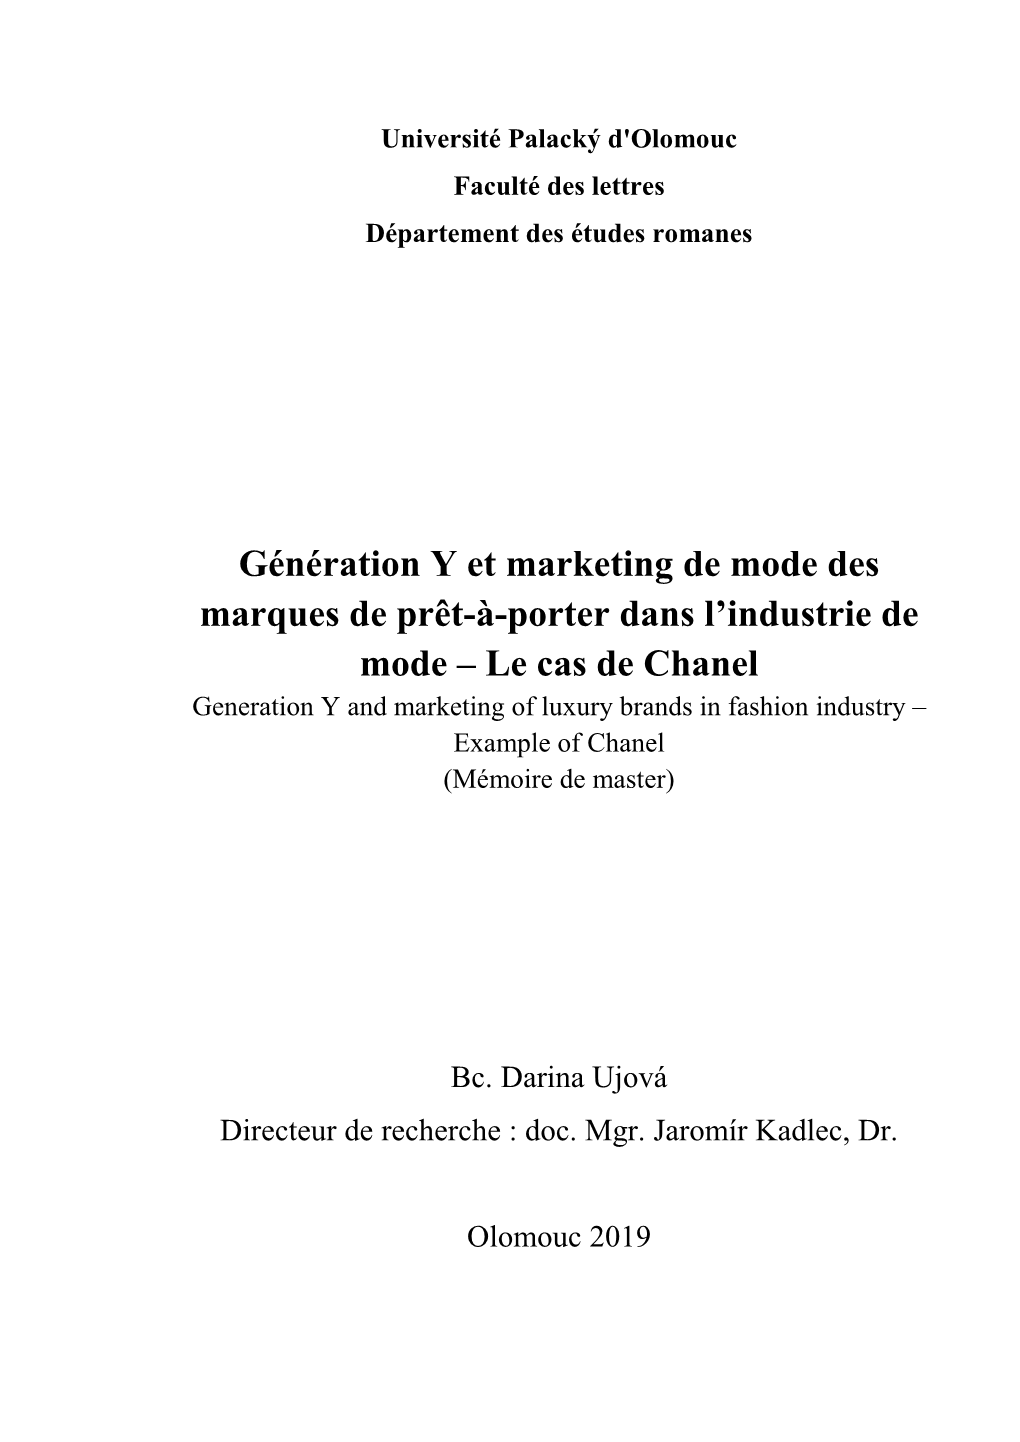 Le Cas De Chanel Generation Y and Marketing of Luxury Brands in Fashion Industry – Example of Chanel (Mémoire De Master)